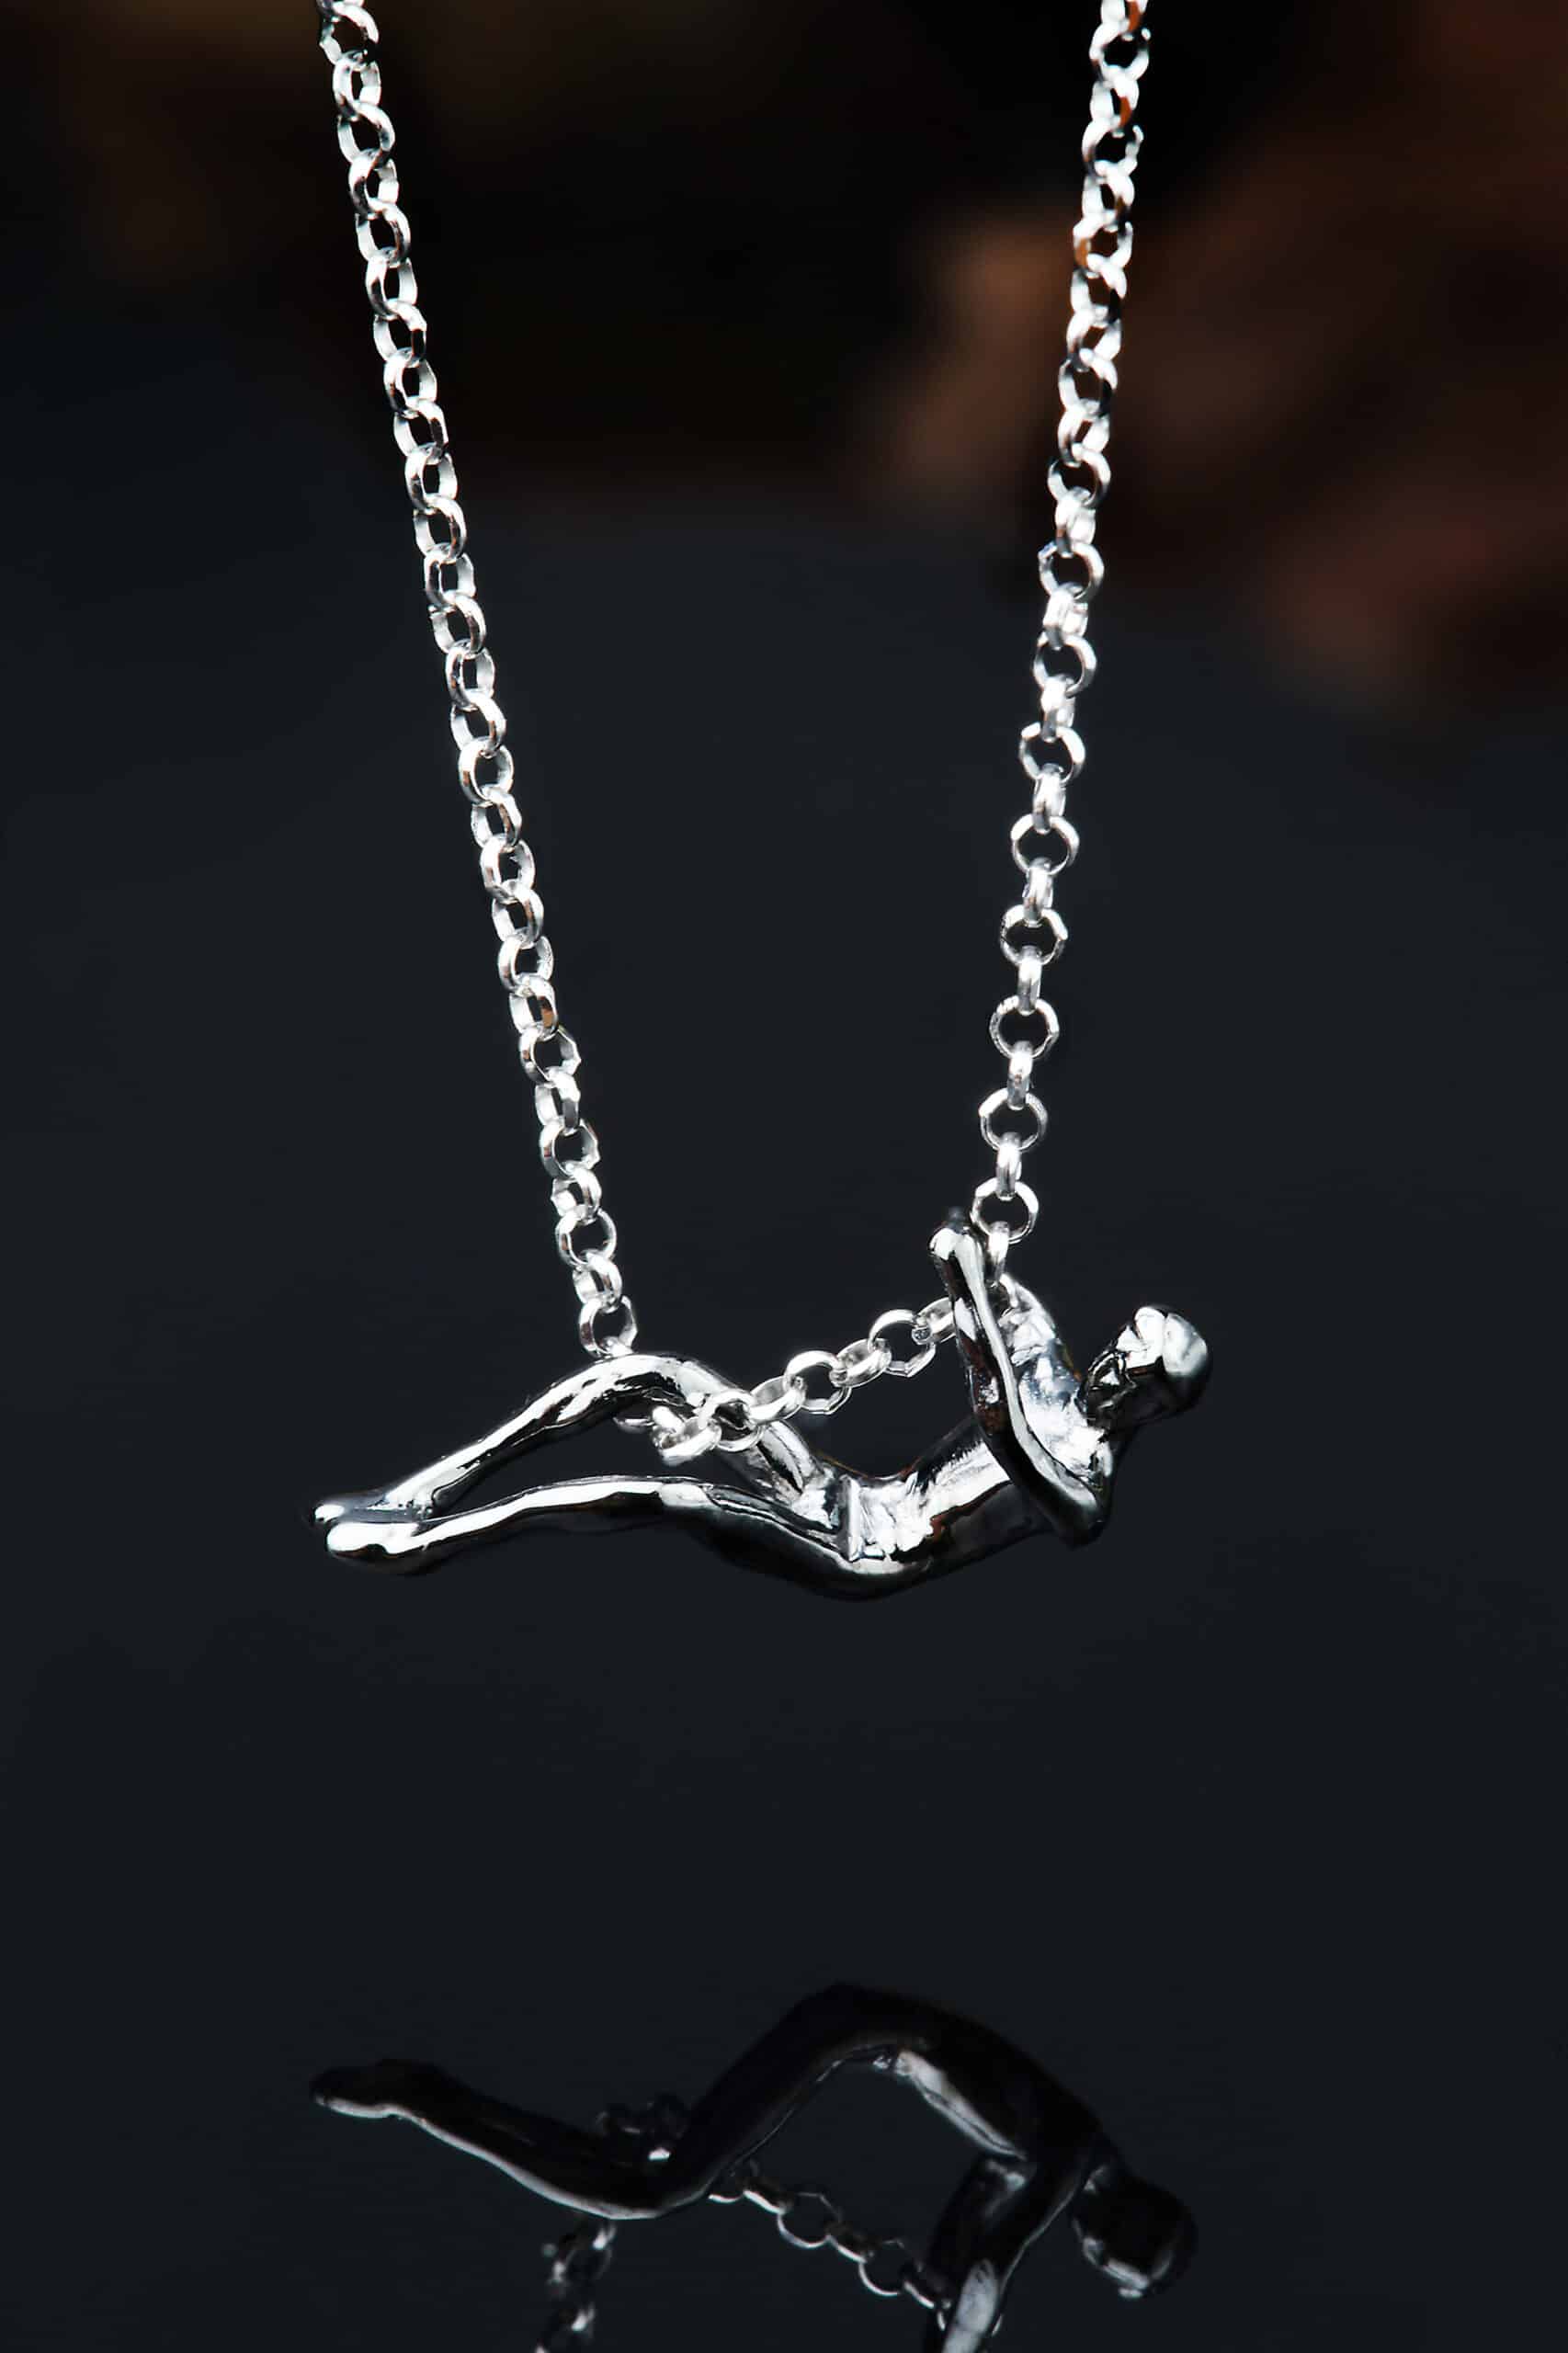 Male figure rhodium plated silver necklace main